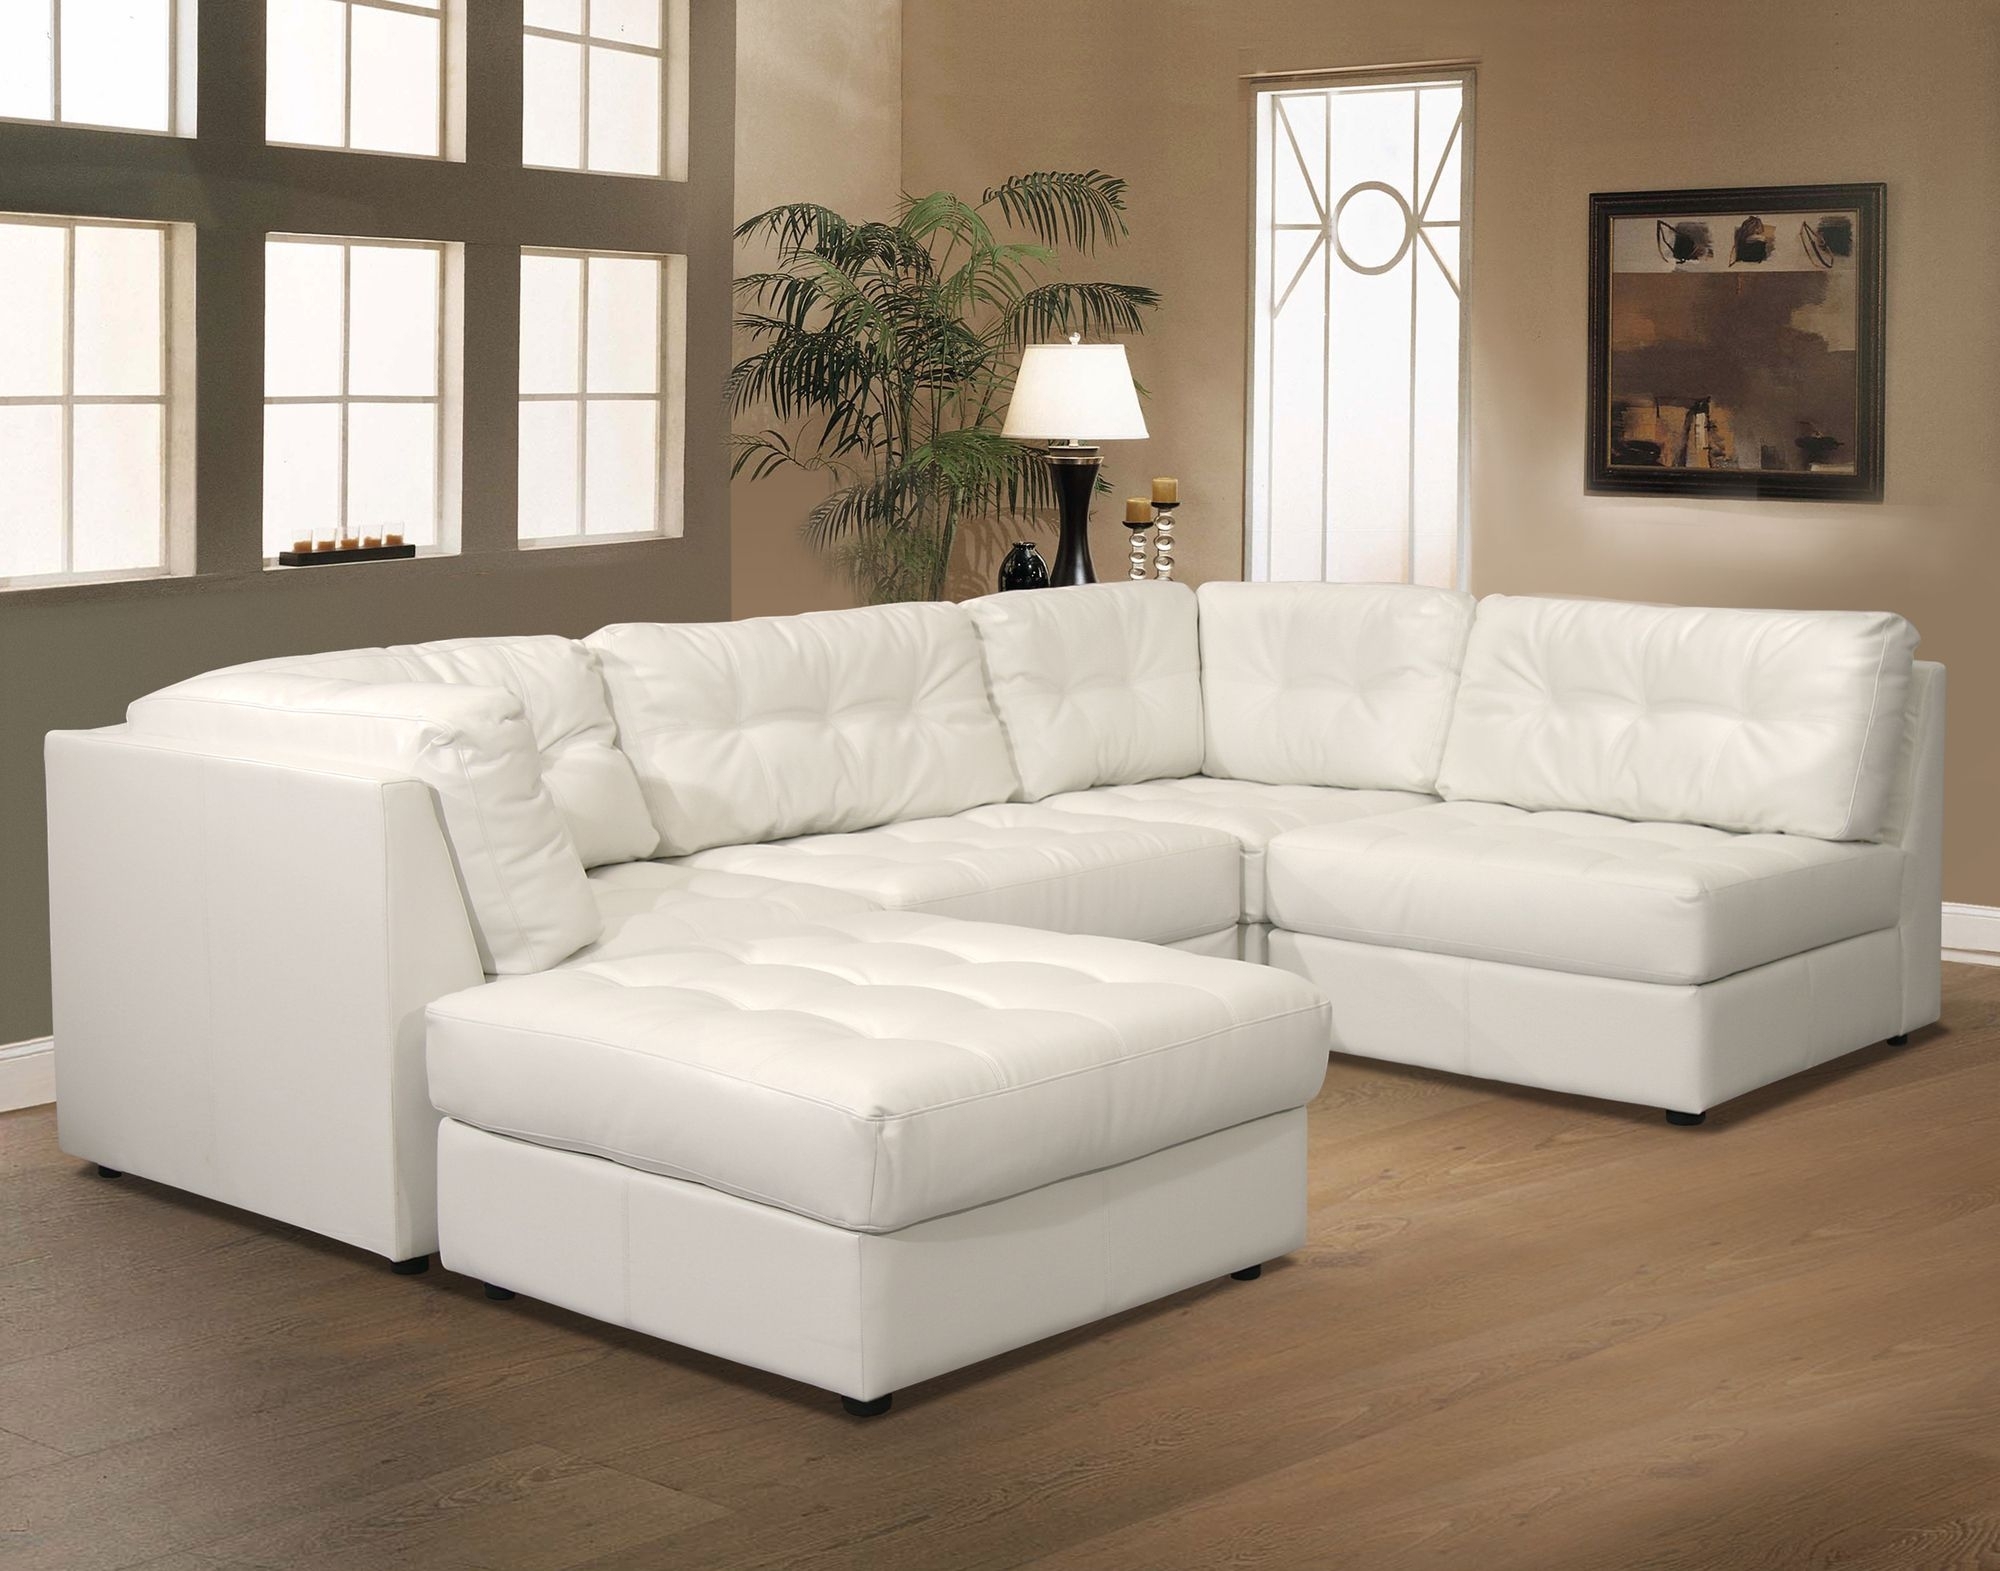 off white leather sectional or sofa loveseat